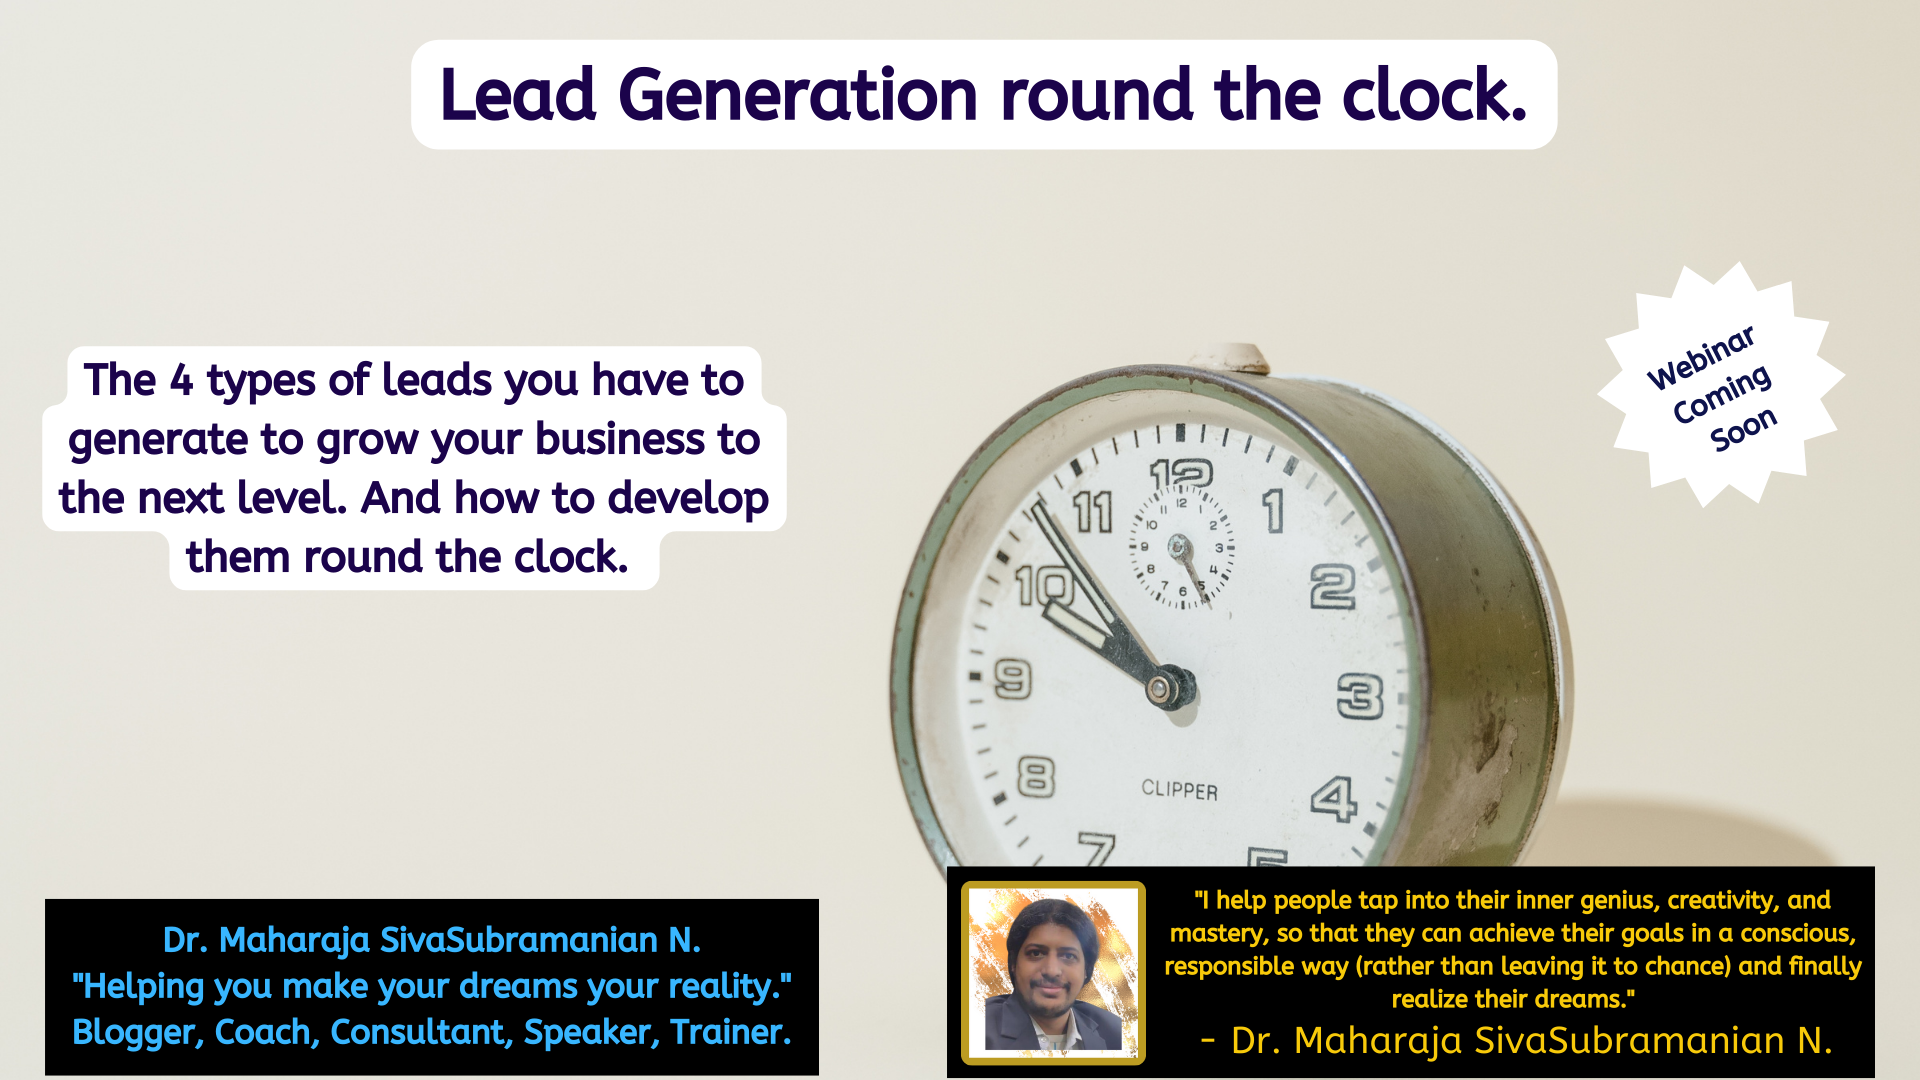 Lead Generation round the clock. – Upcoming free webinar.